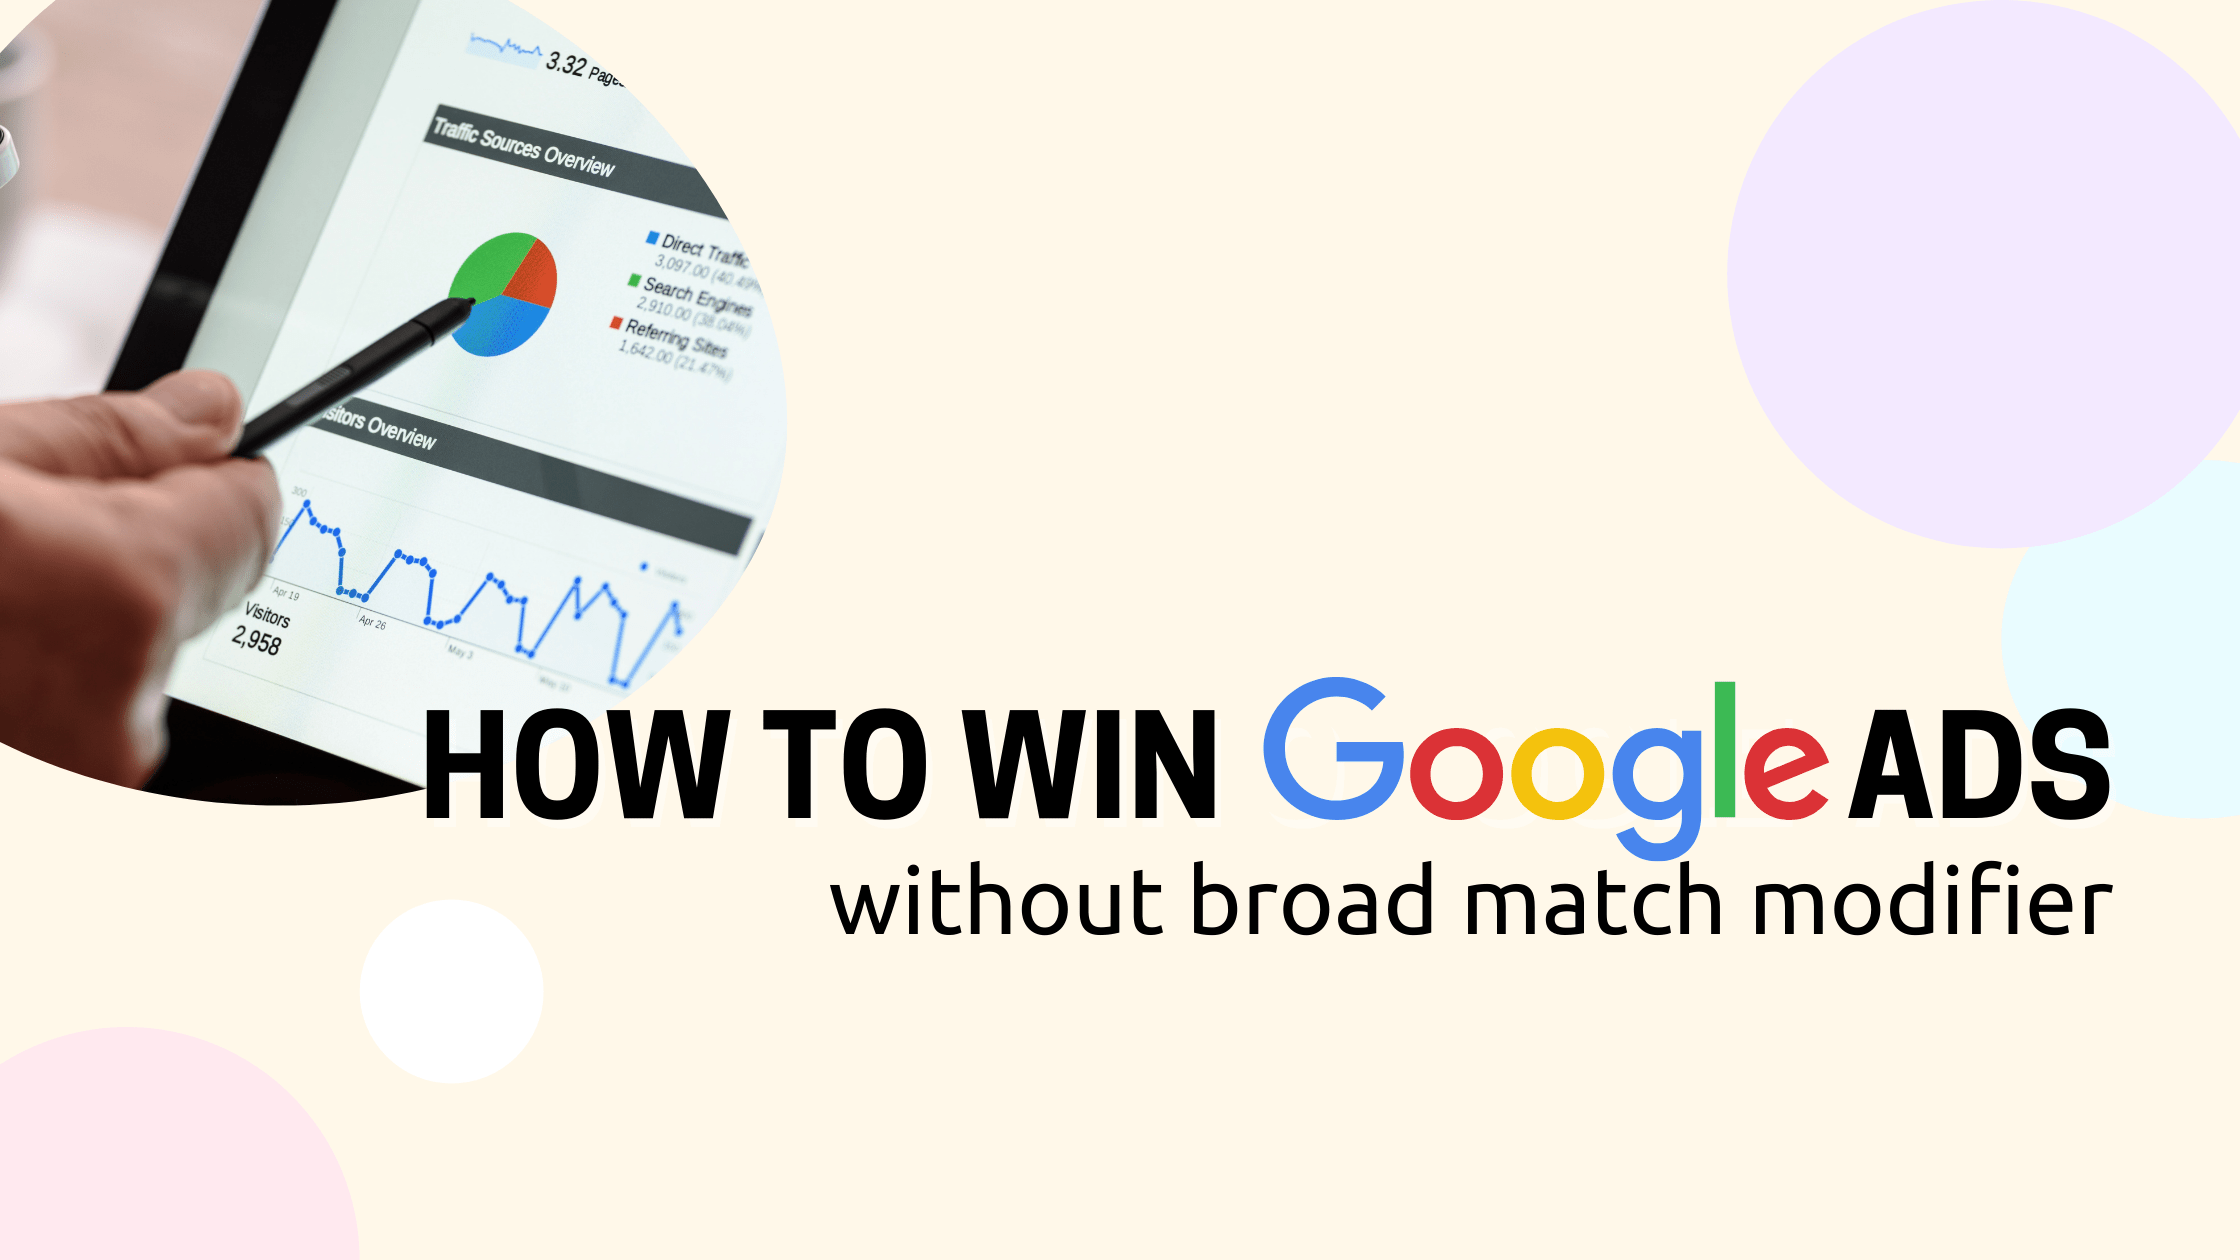 Google removed Broad Match Modifier. Different ways to Succeed in Google Ads Without Modified Broad Match?